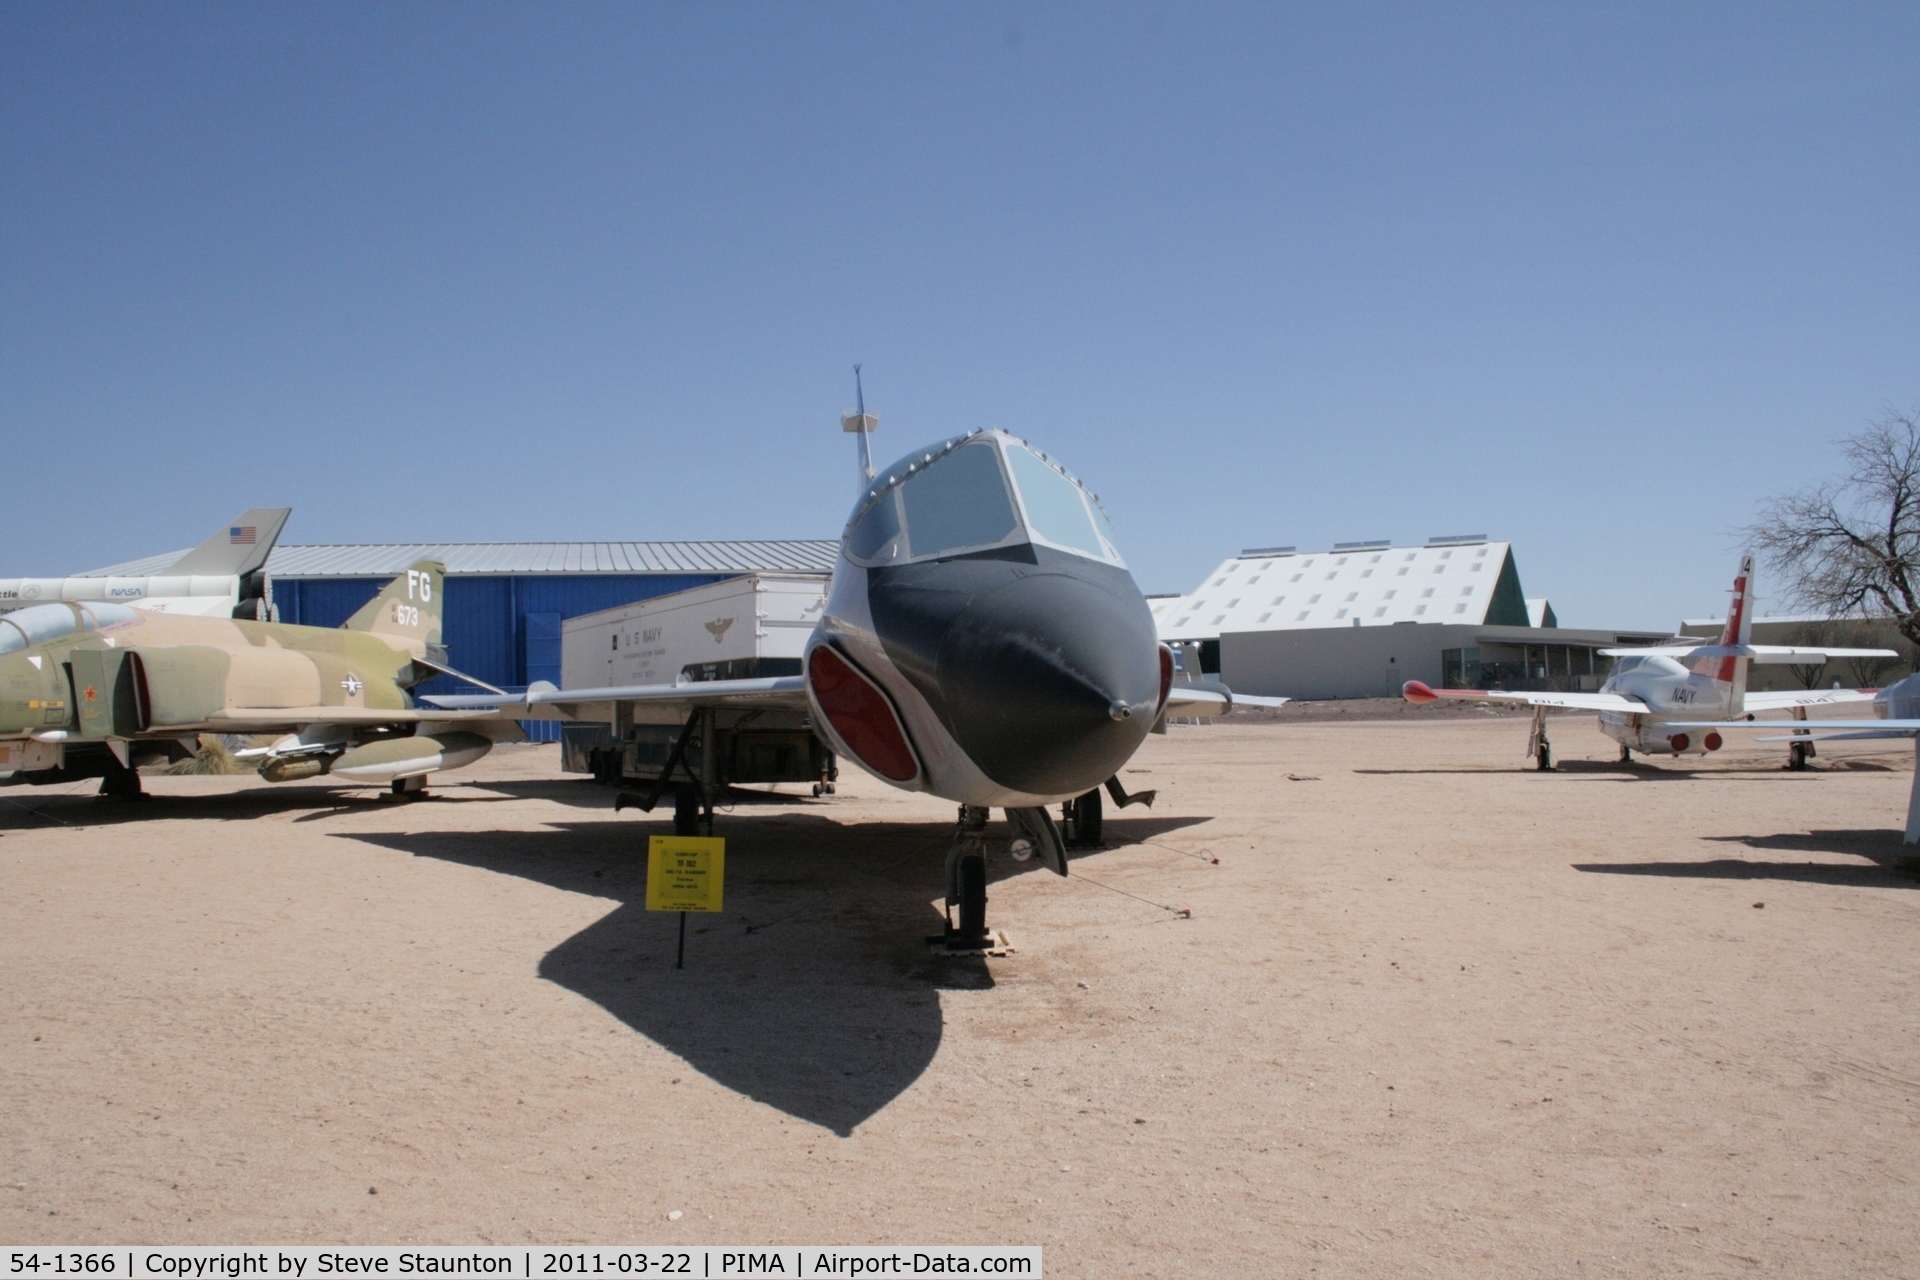 54-1366, 1954 Convair TF-102A Delta Dagger C/N Not found 54-1366, Taken at Pima Air and Space Museum, in March 2011 whilst on an Aeroprint Aviation tour